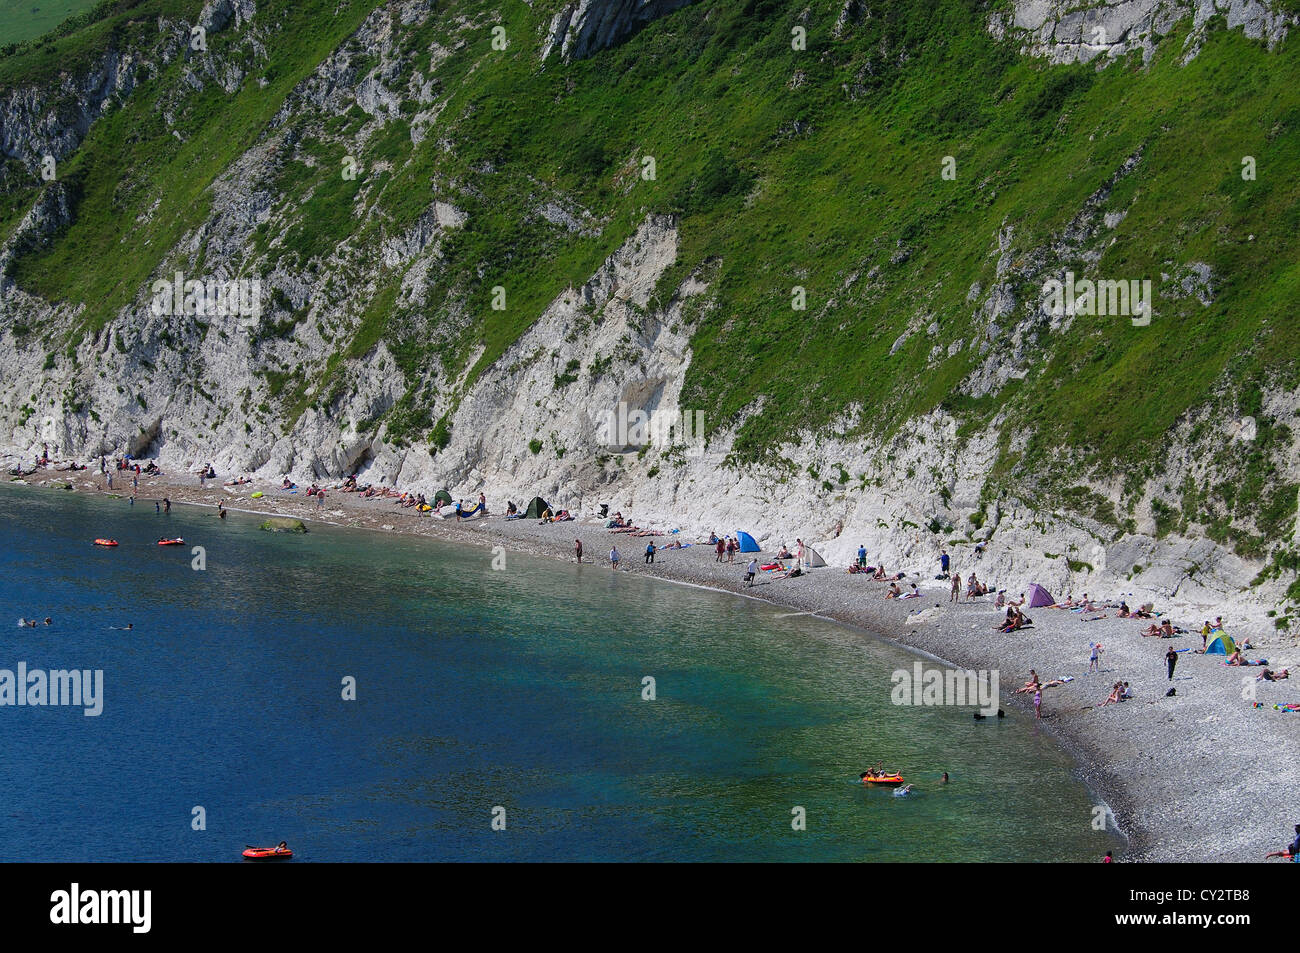 A view of Lulworth Cove Dorset with the bay, beach and bathers in the summer UK Stock Photo